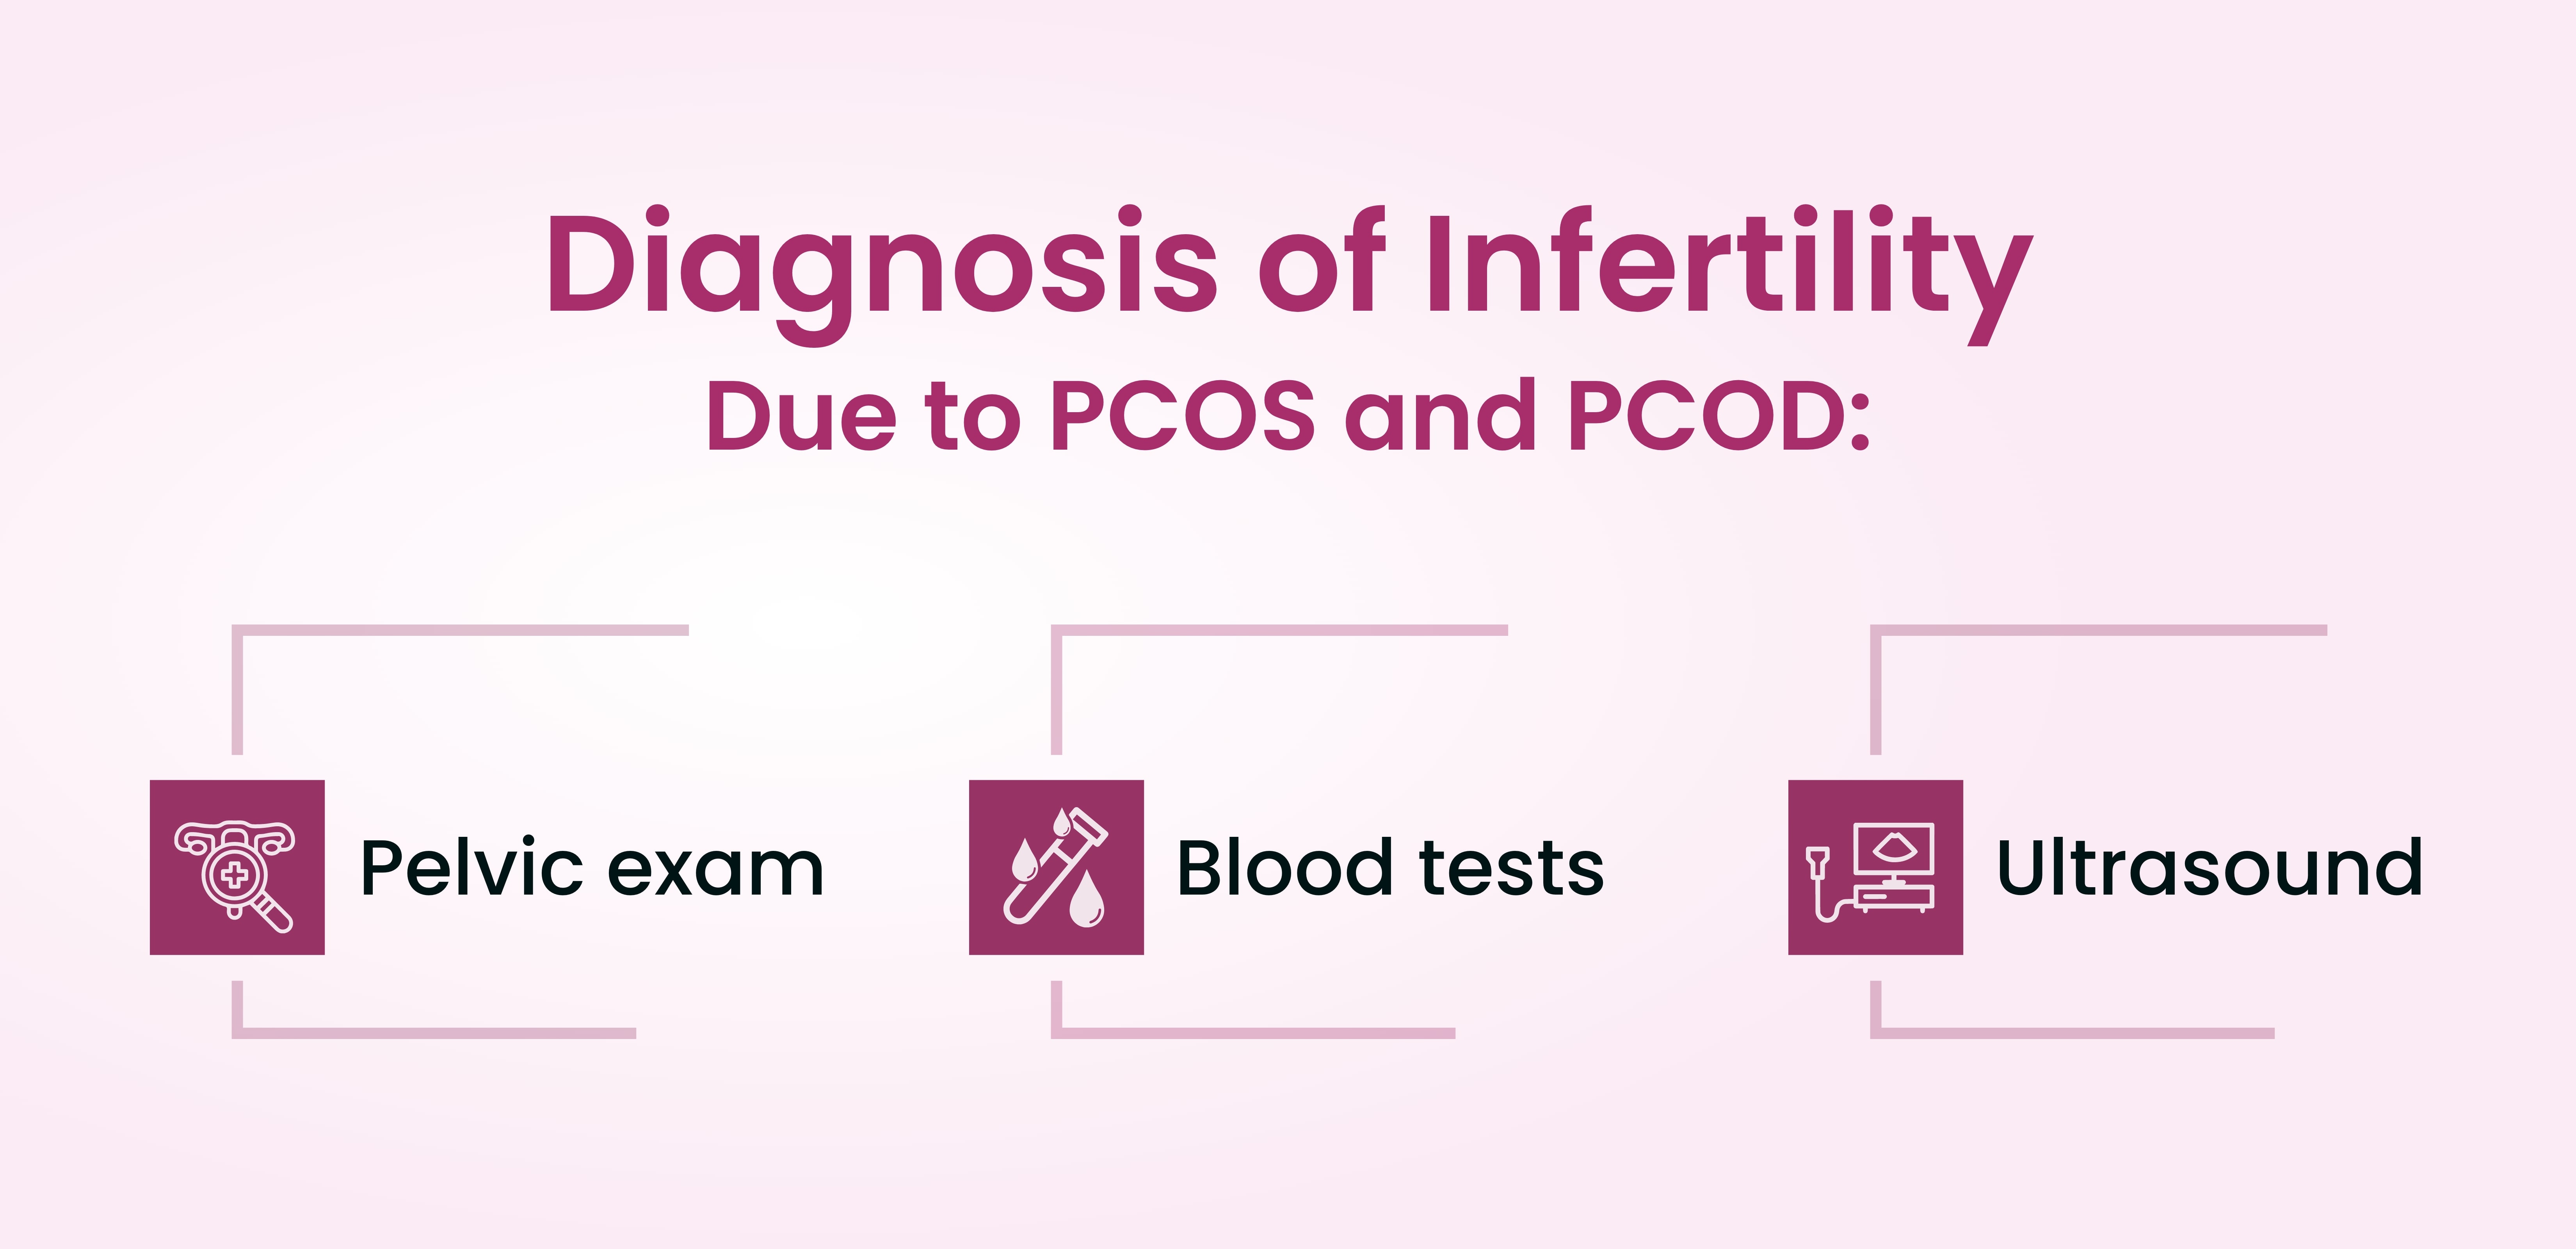 Diagnosis of Infertility Due to PCOS and PCOD: